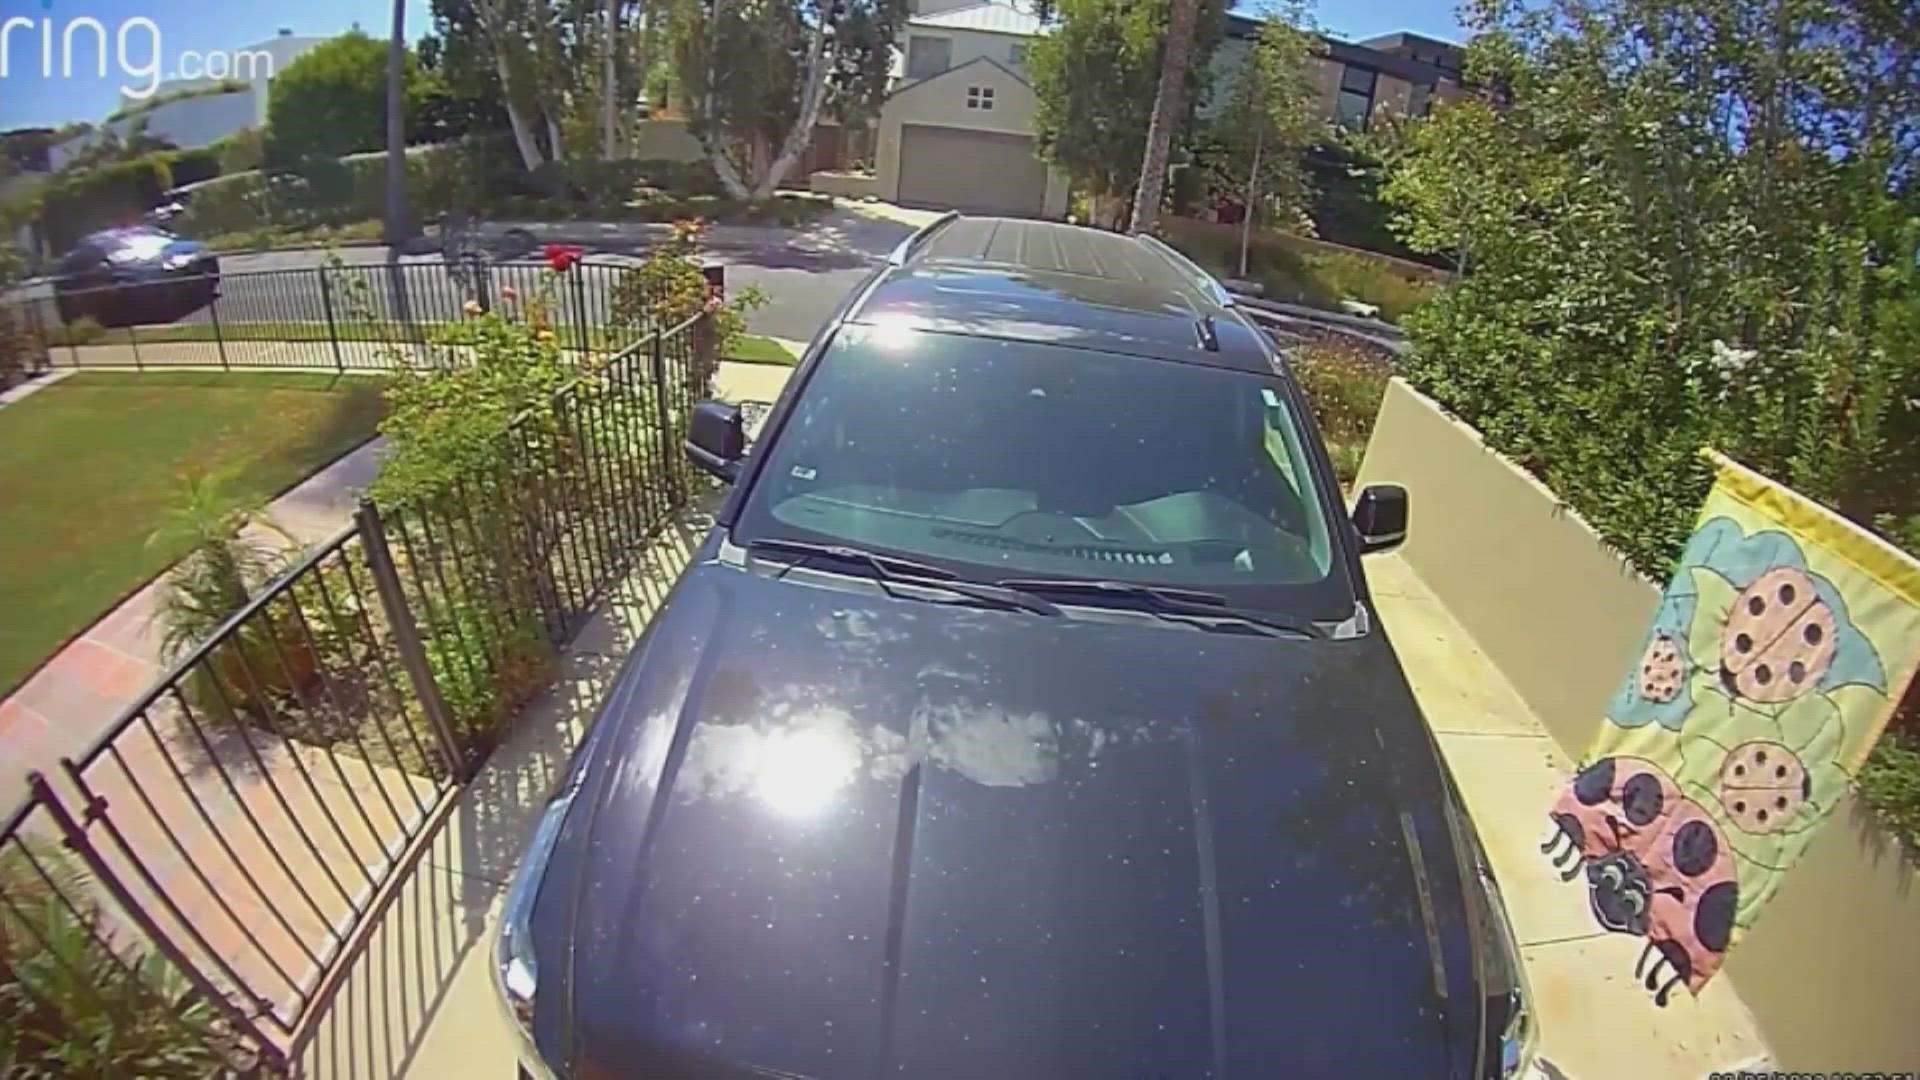 Surveillance video from a nearby residence shows the car that is registered to actress Anne Heche flying down the street in a Mar Vista neighborhood.